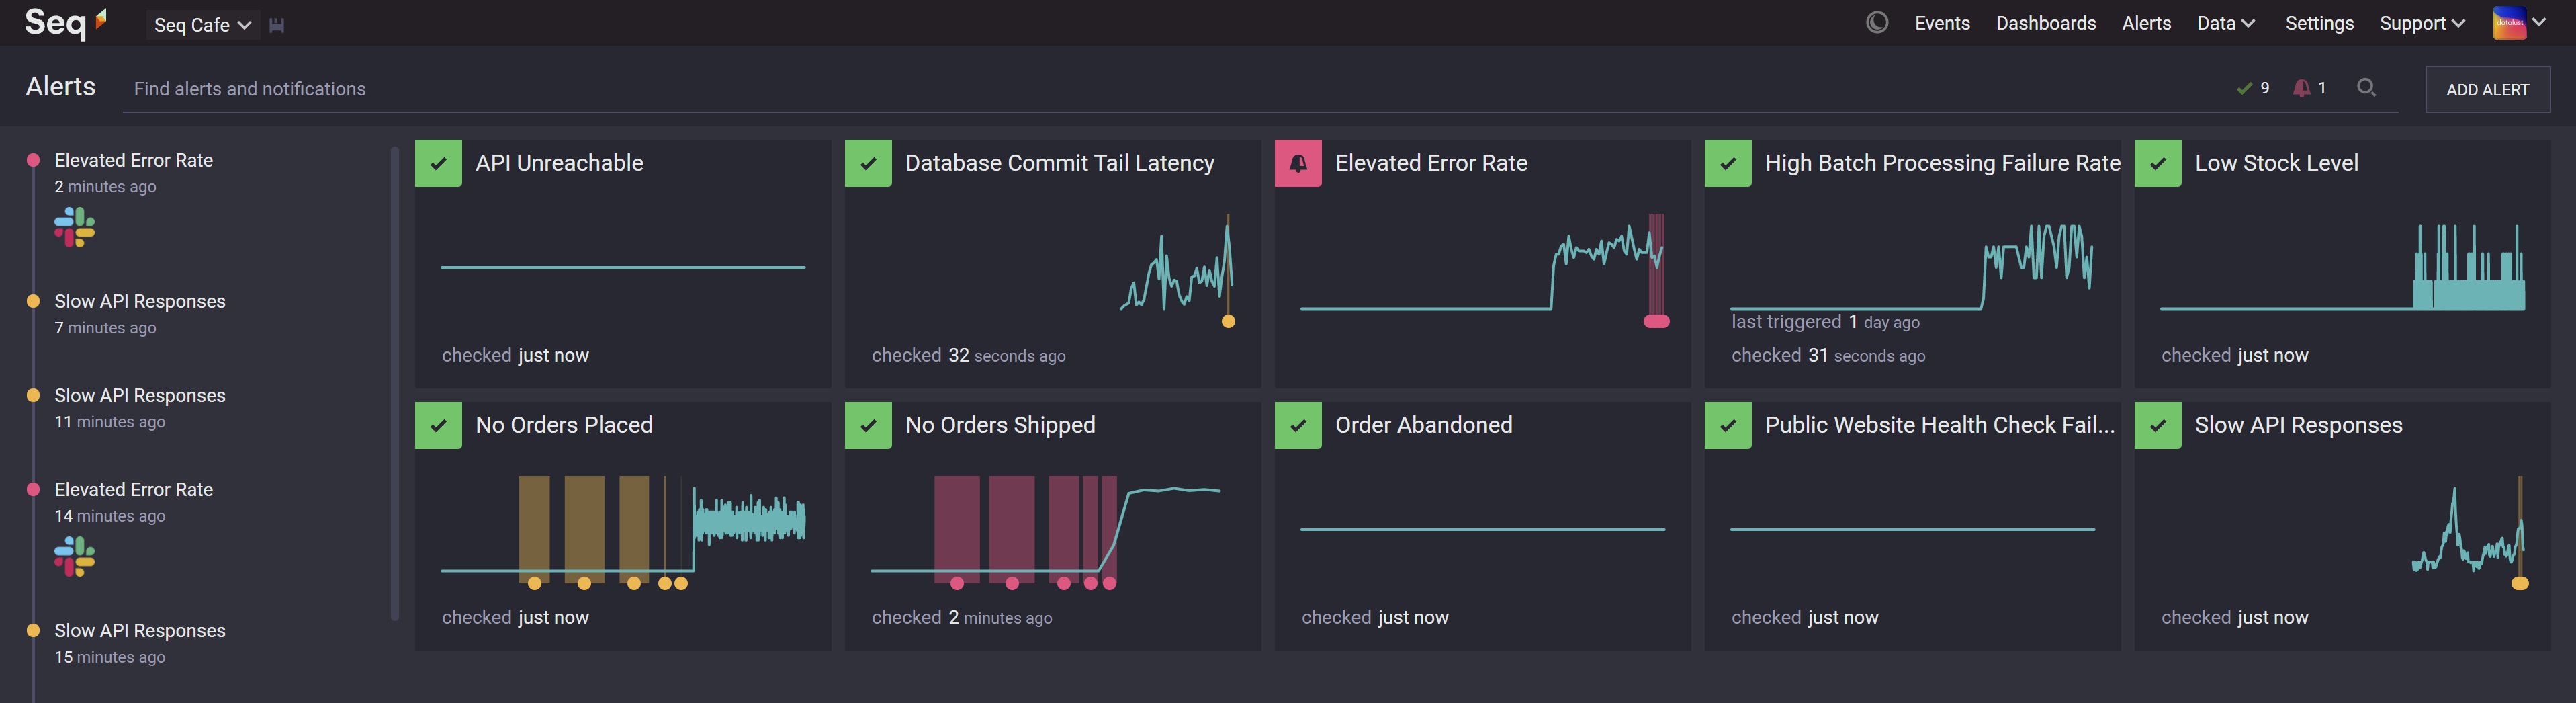 A view of the Seq alerts dashboard.